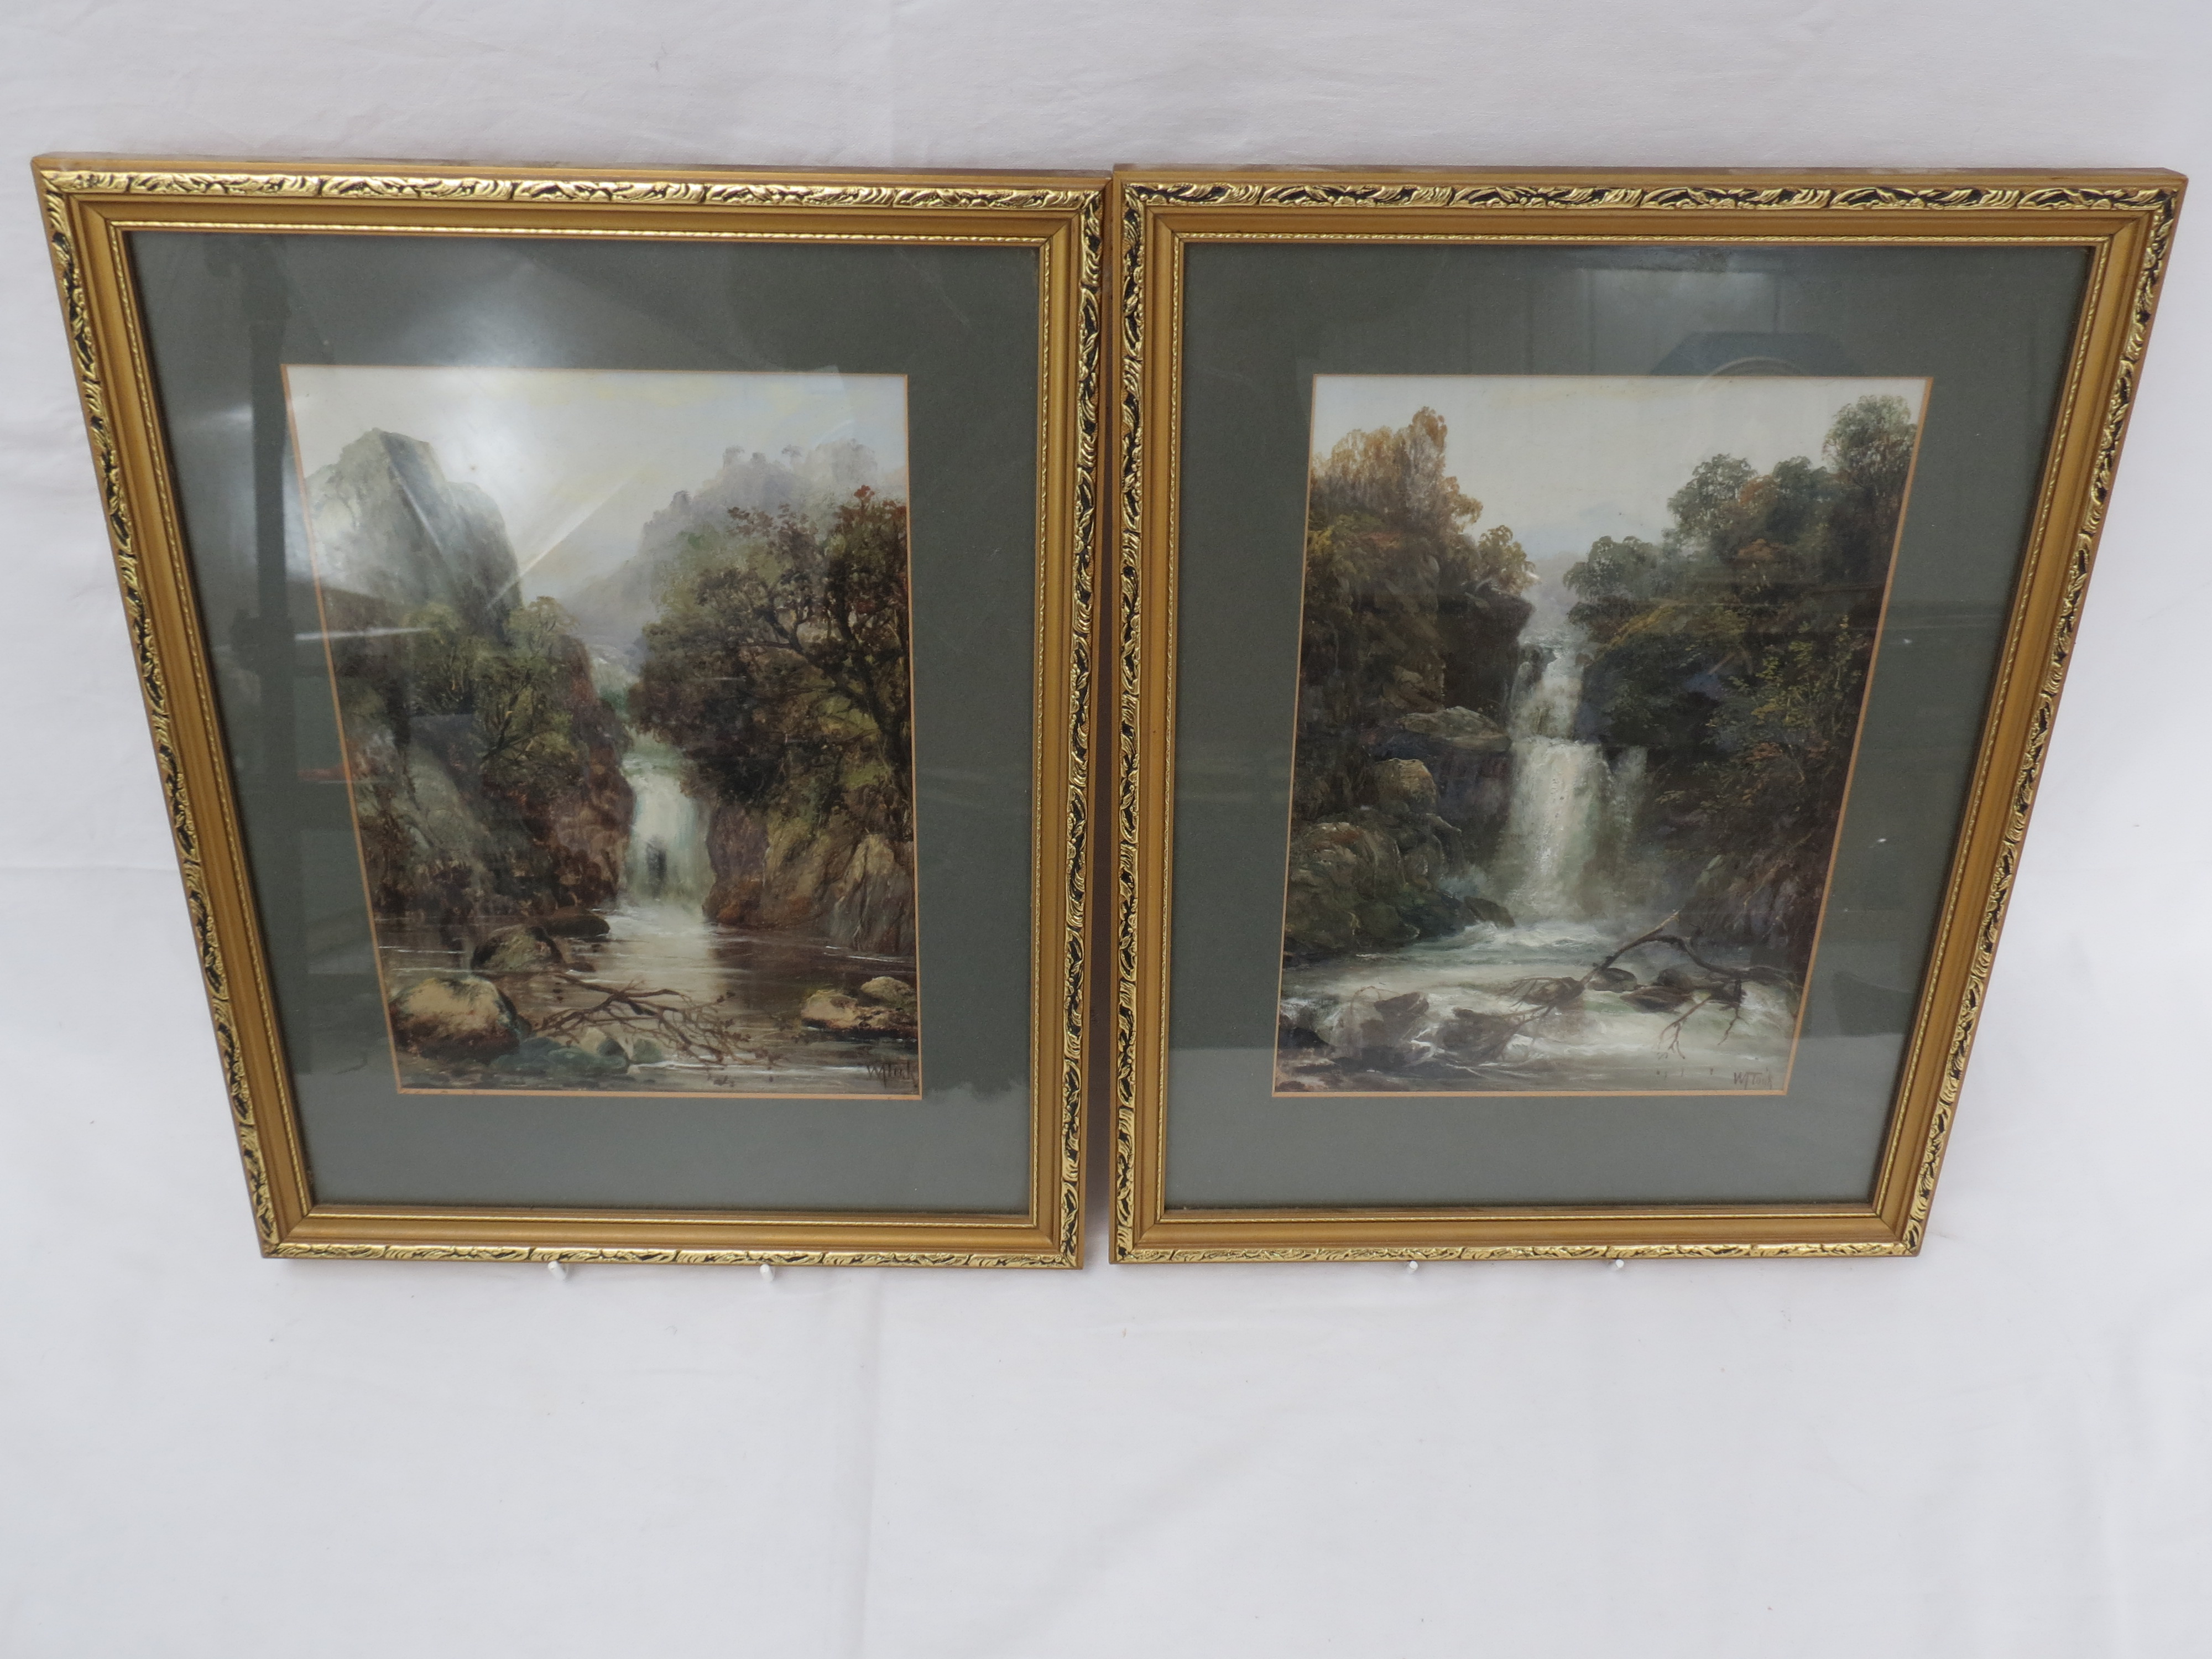 M Took. 'Thornton Force, Yorks', 'Pecca Falls, Yorks', a pair of watercolours, signed lower